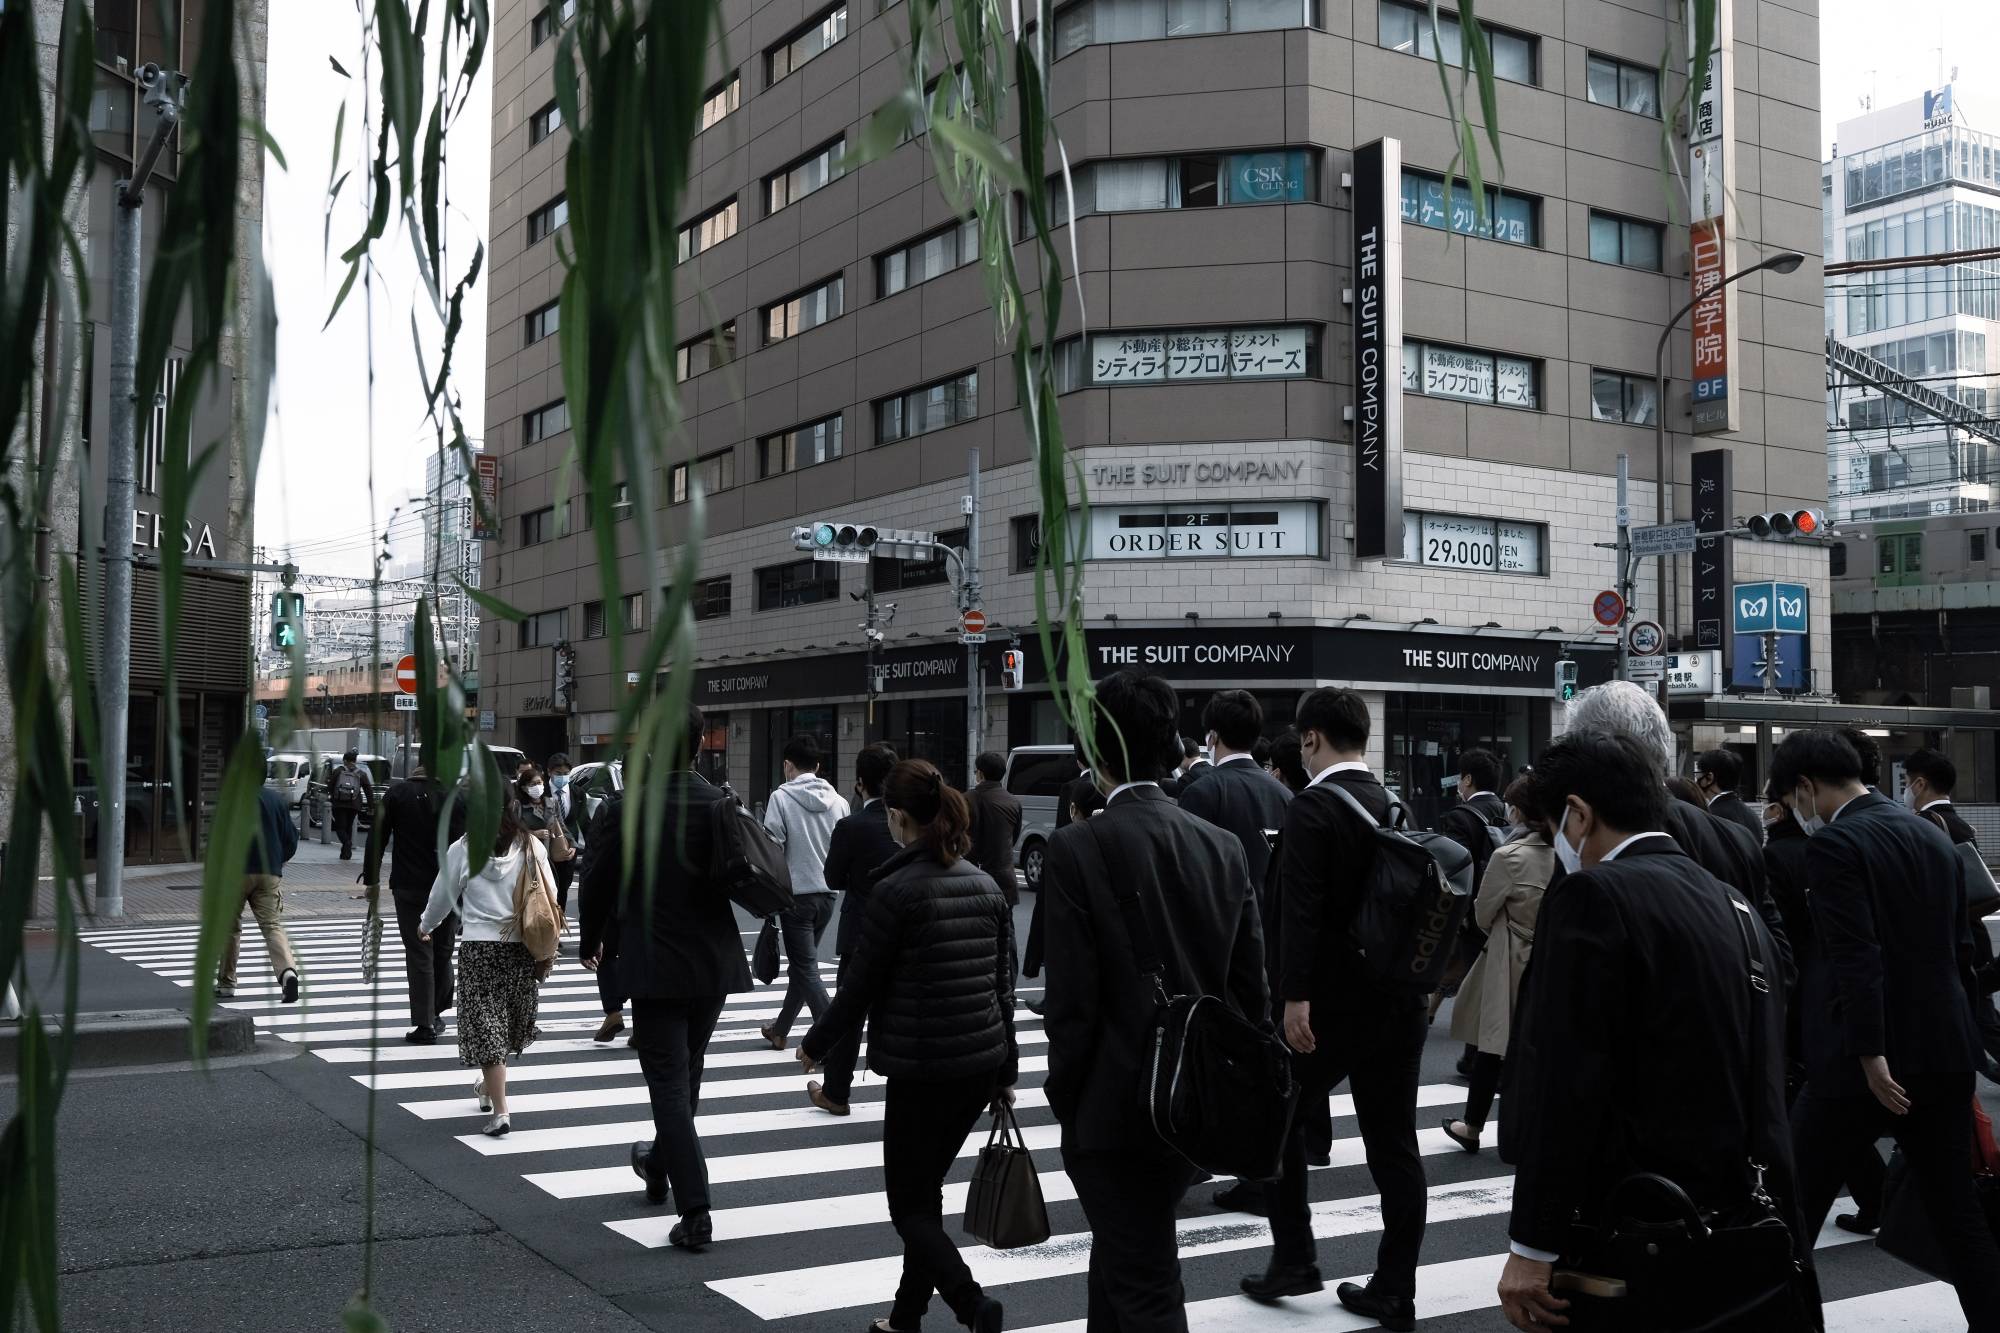 Japan's jobless rate rose to 3.1% in October, the highest level in over three years, amid the coronavirus pandemic. | BLOOMBERG